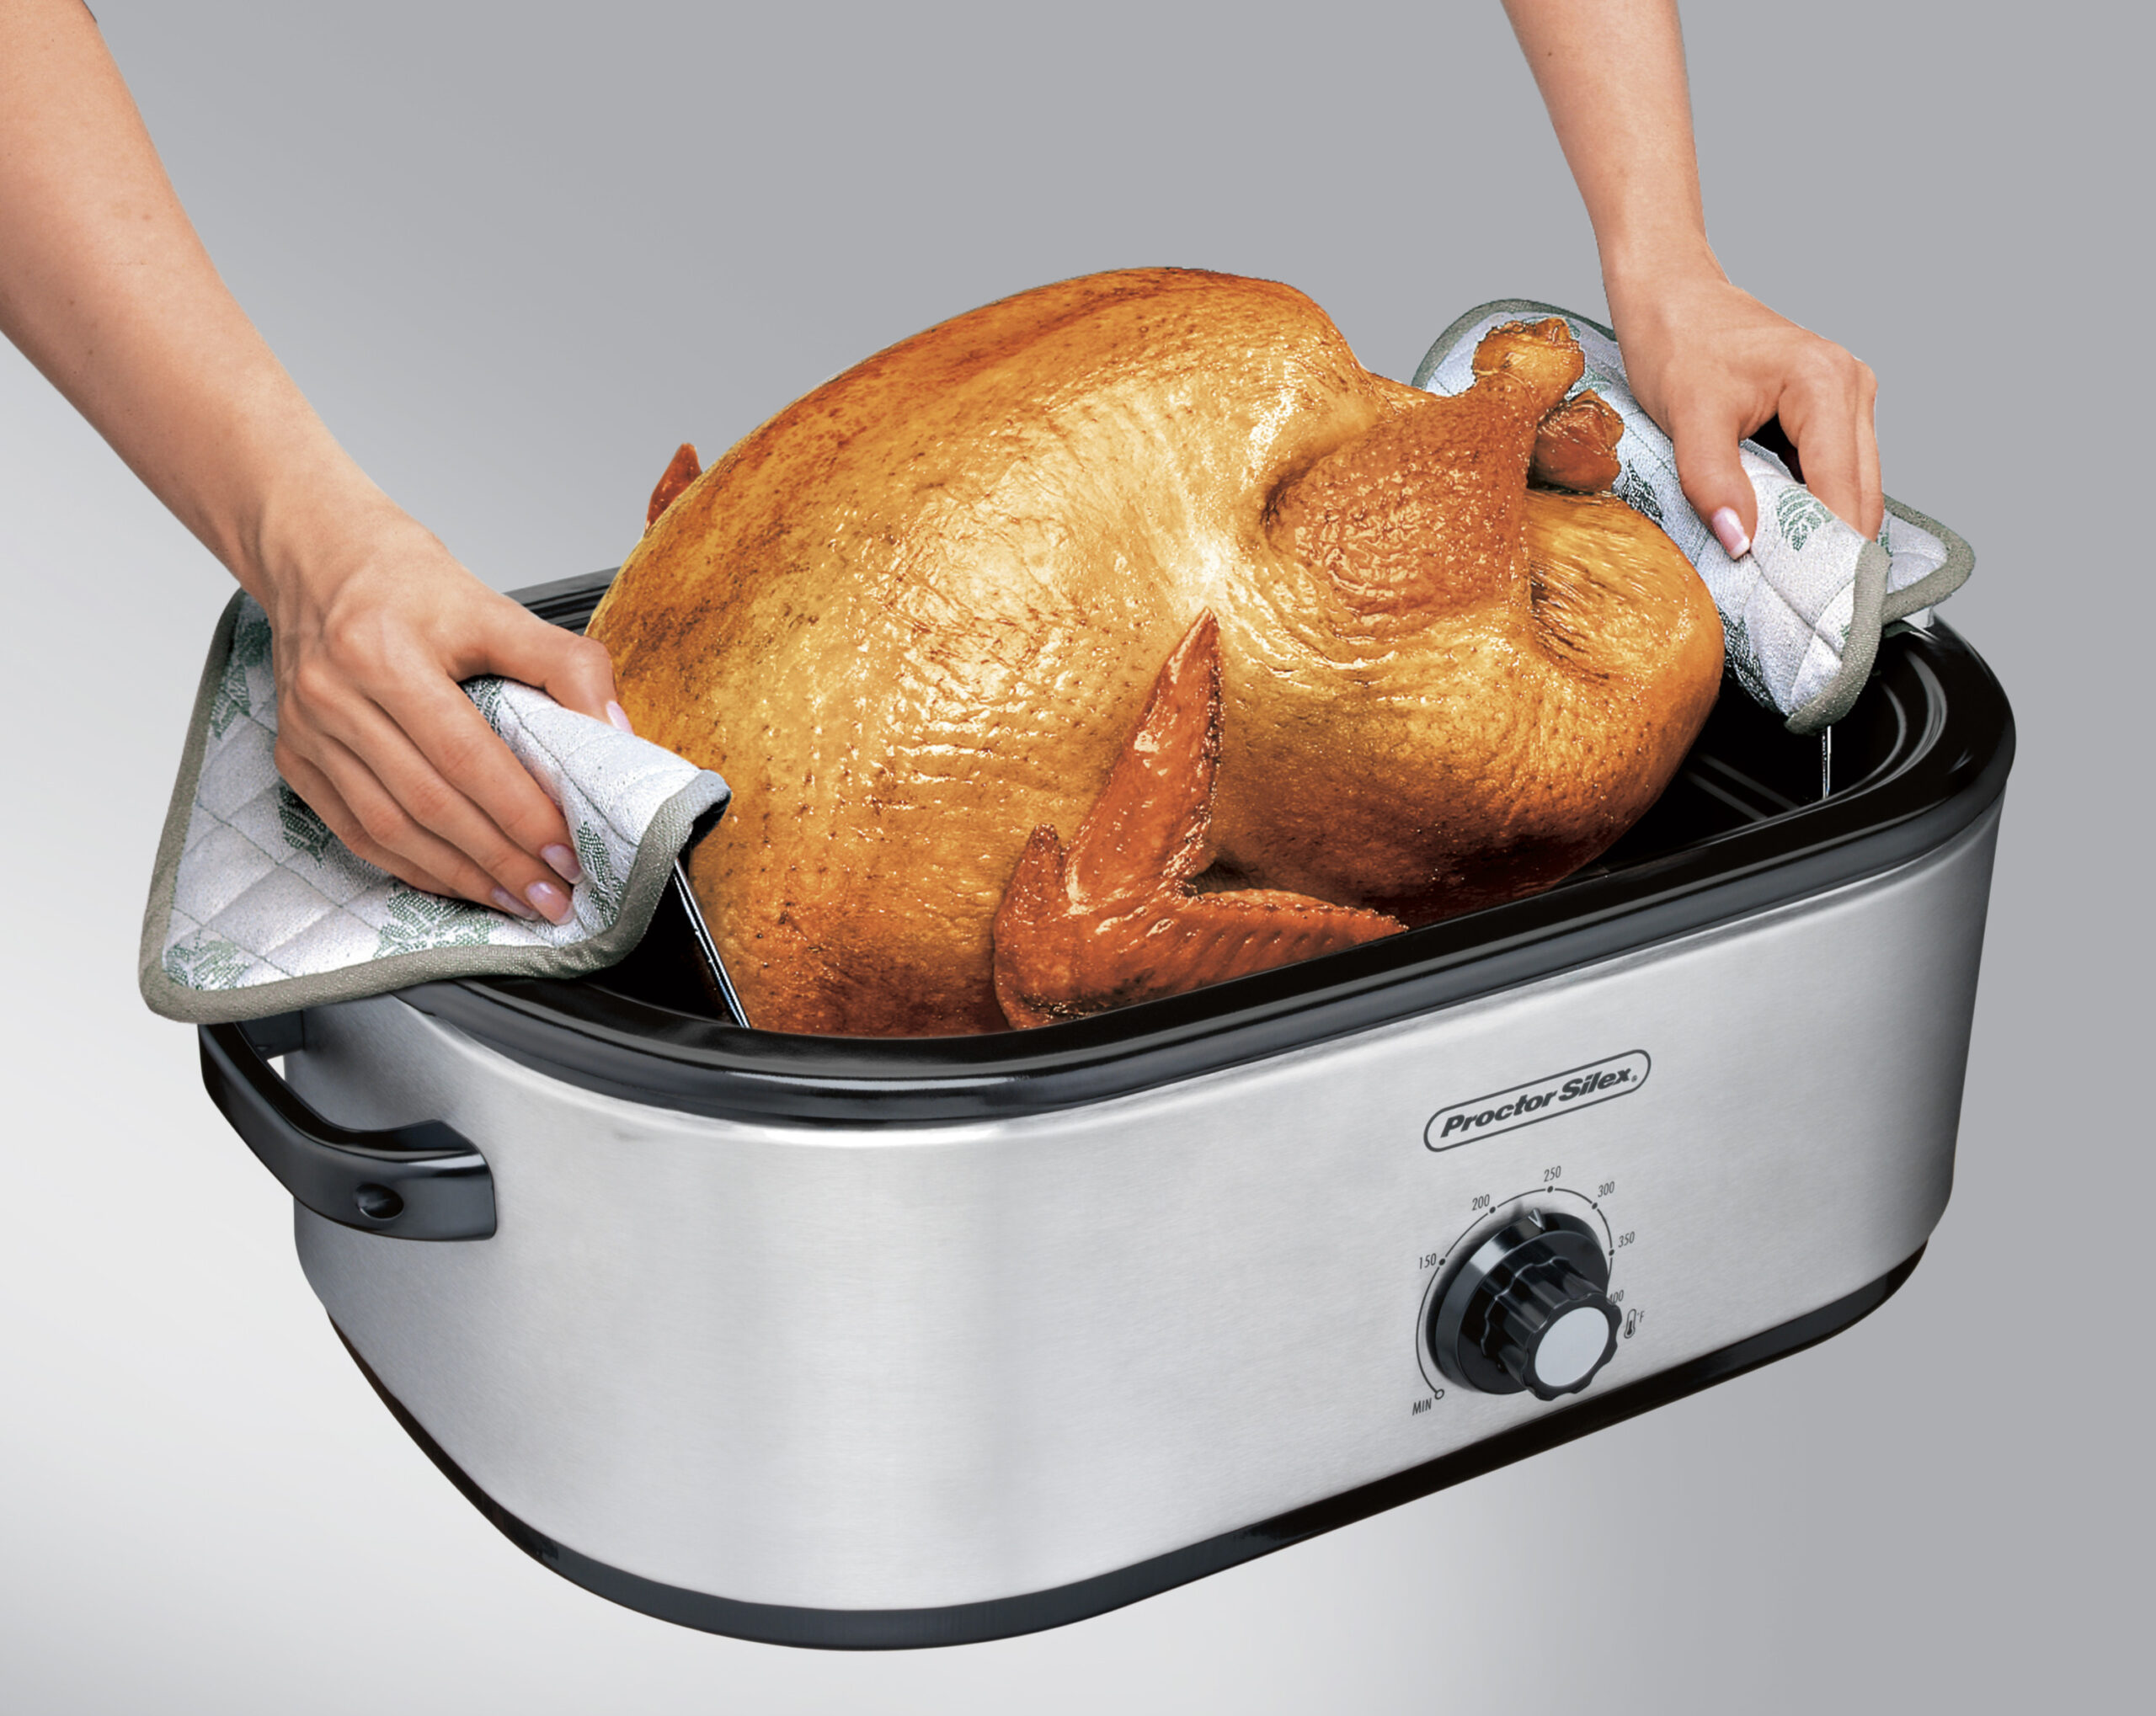 How long does a turkey take to cook in a NESCO roaster